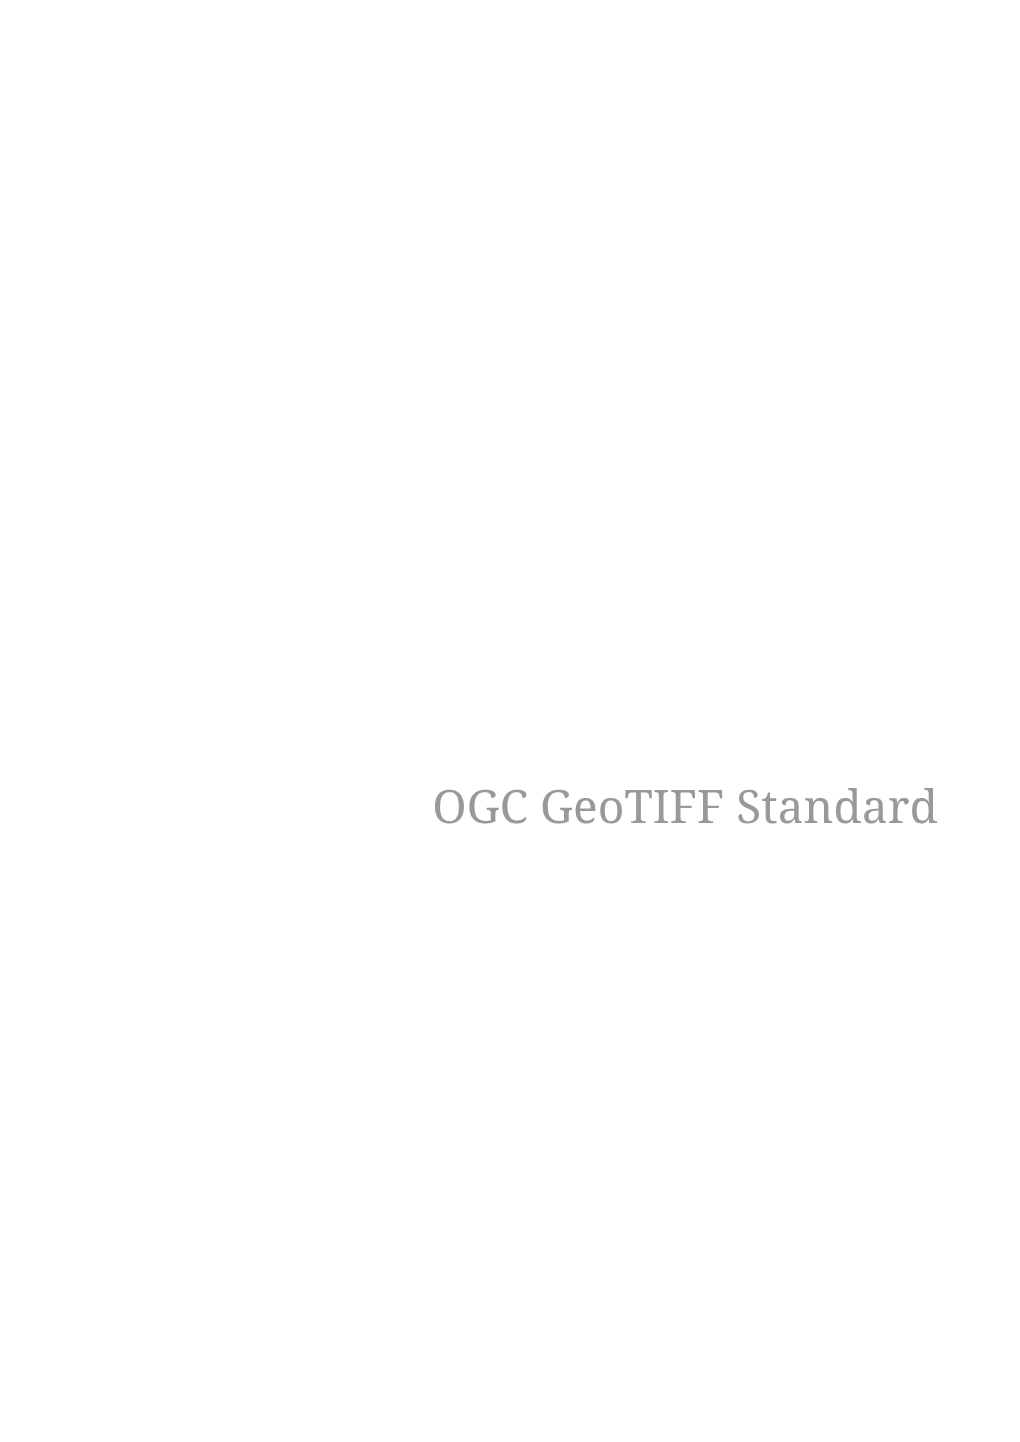 OGC Geotiff Standard Table of Contents